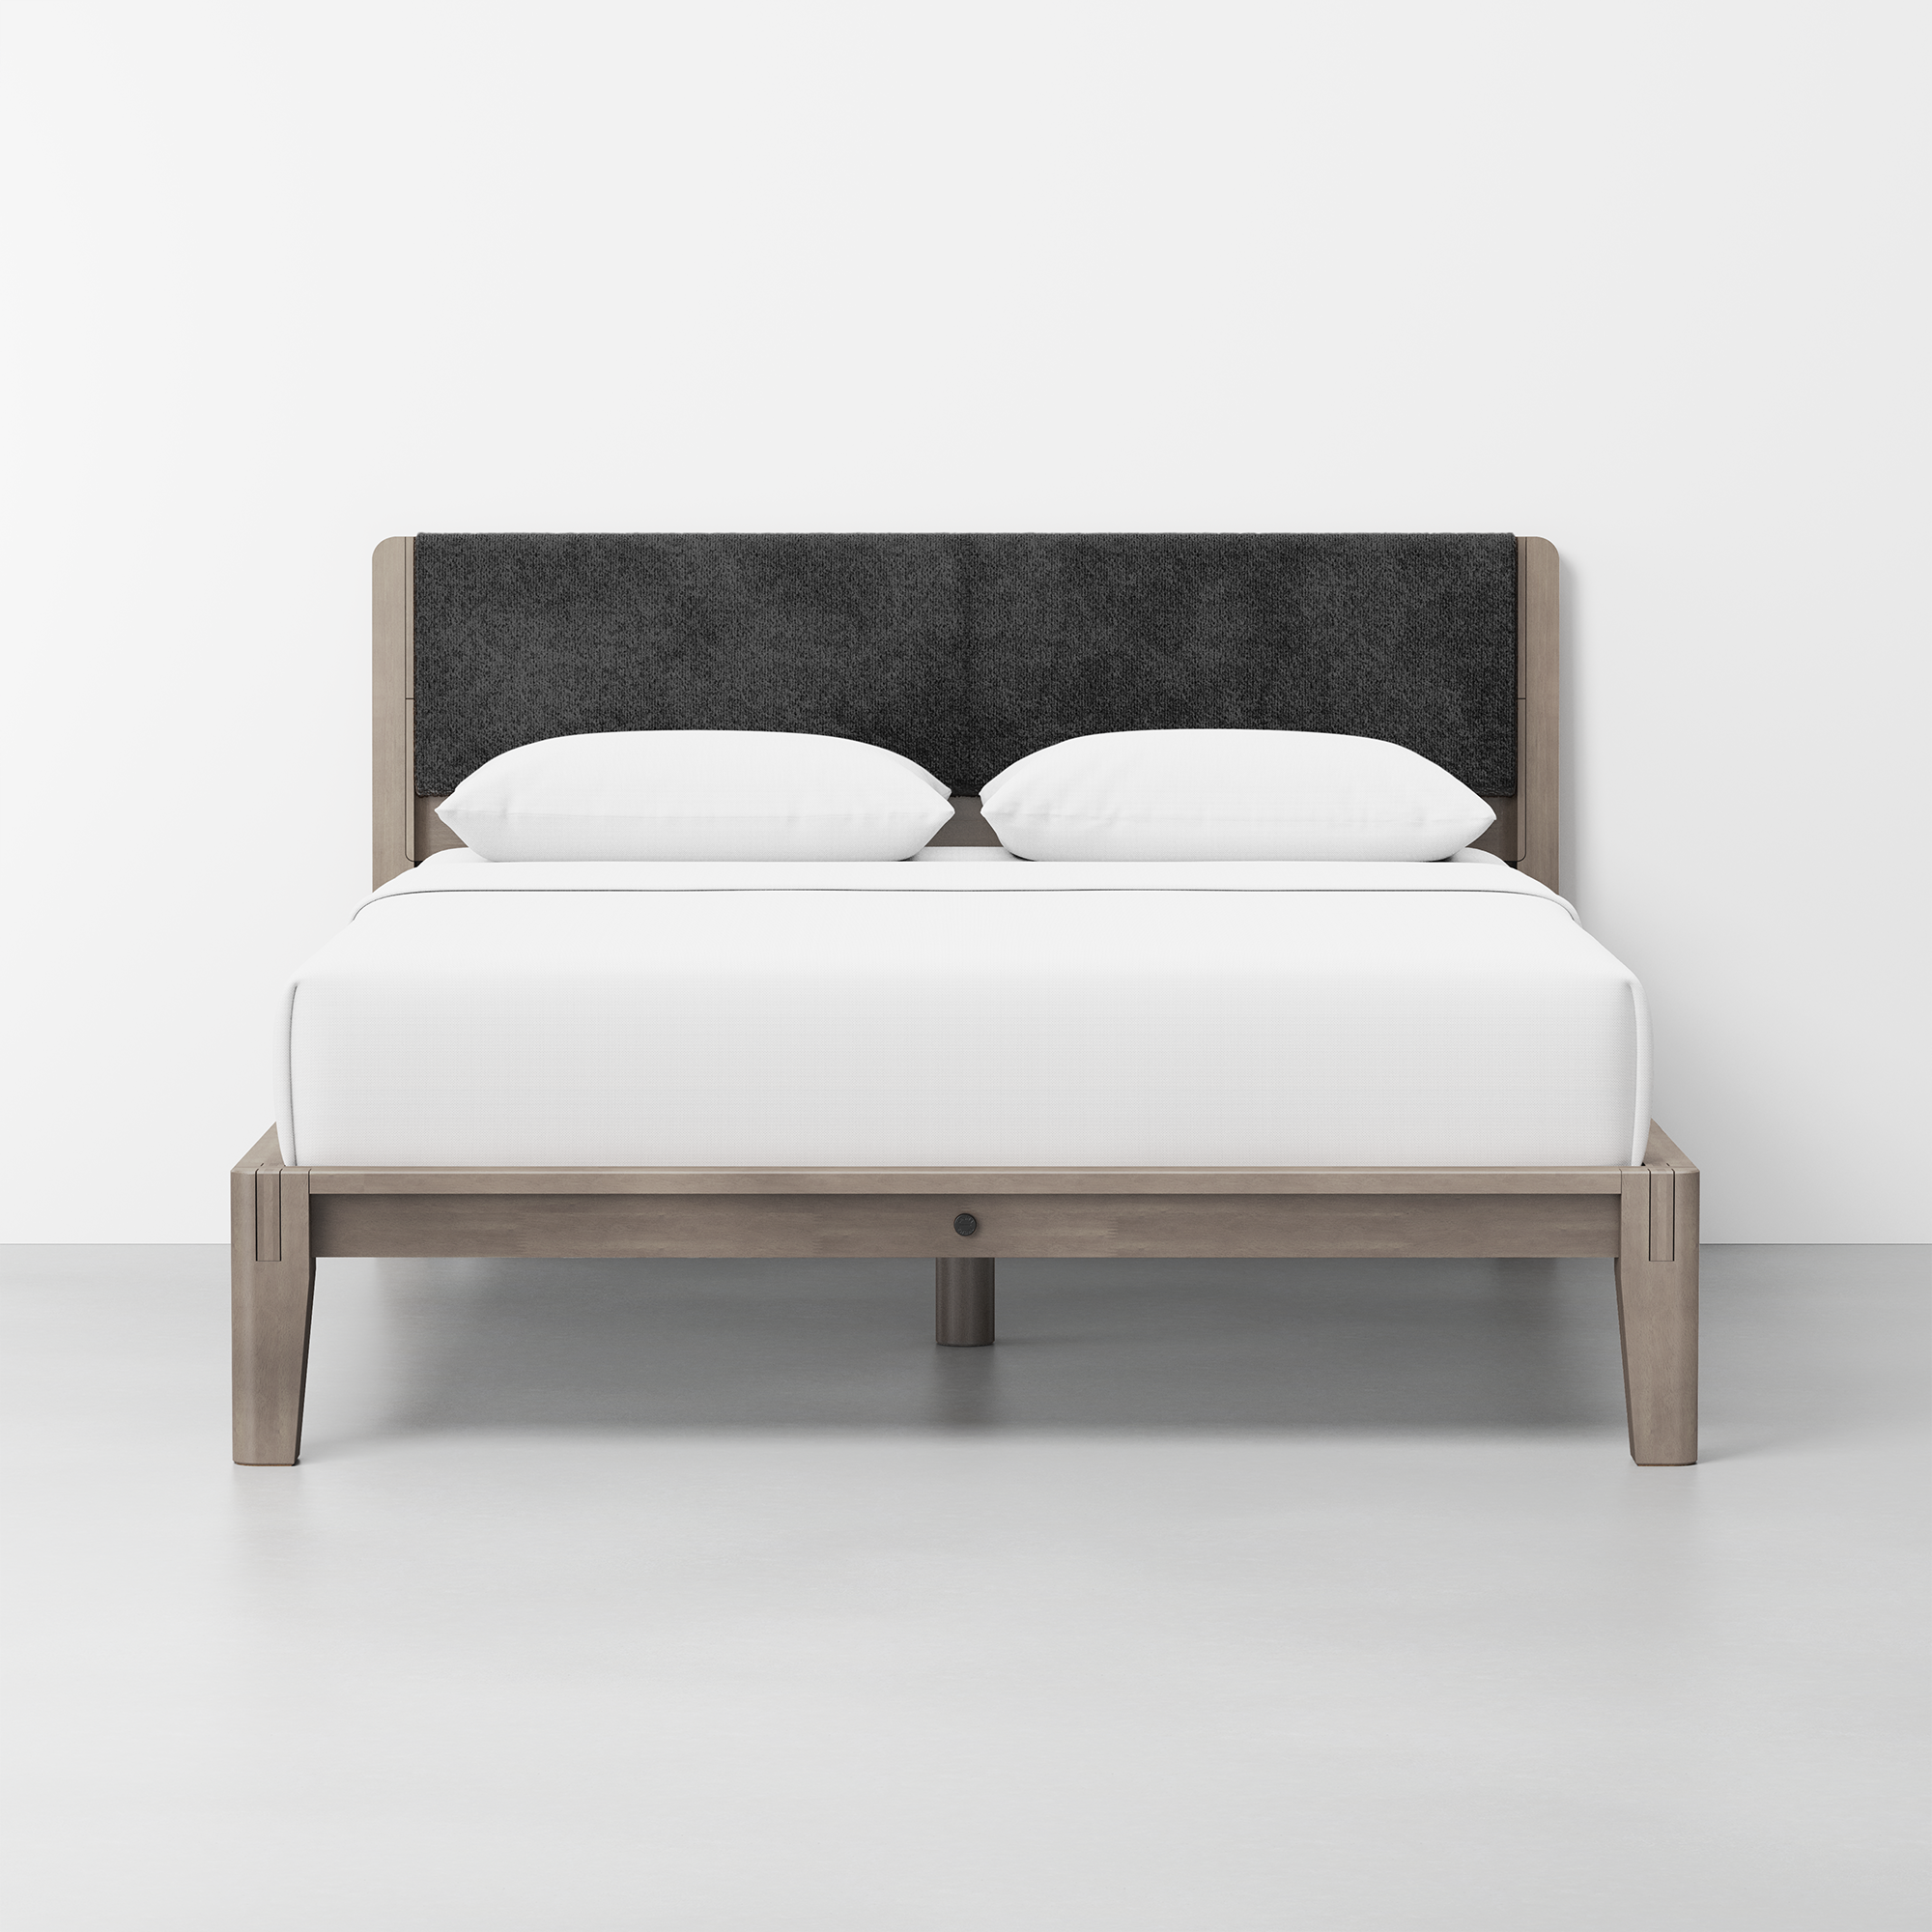 The Bed (Grey / HB Cushion Graphite) - Render - Front